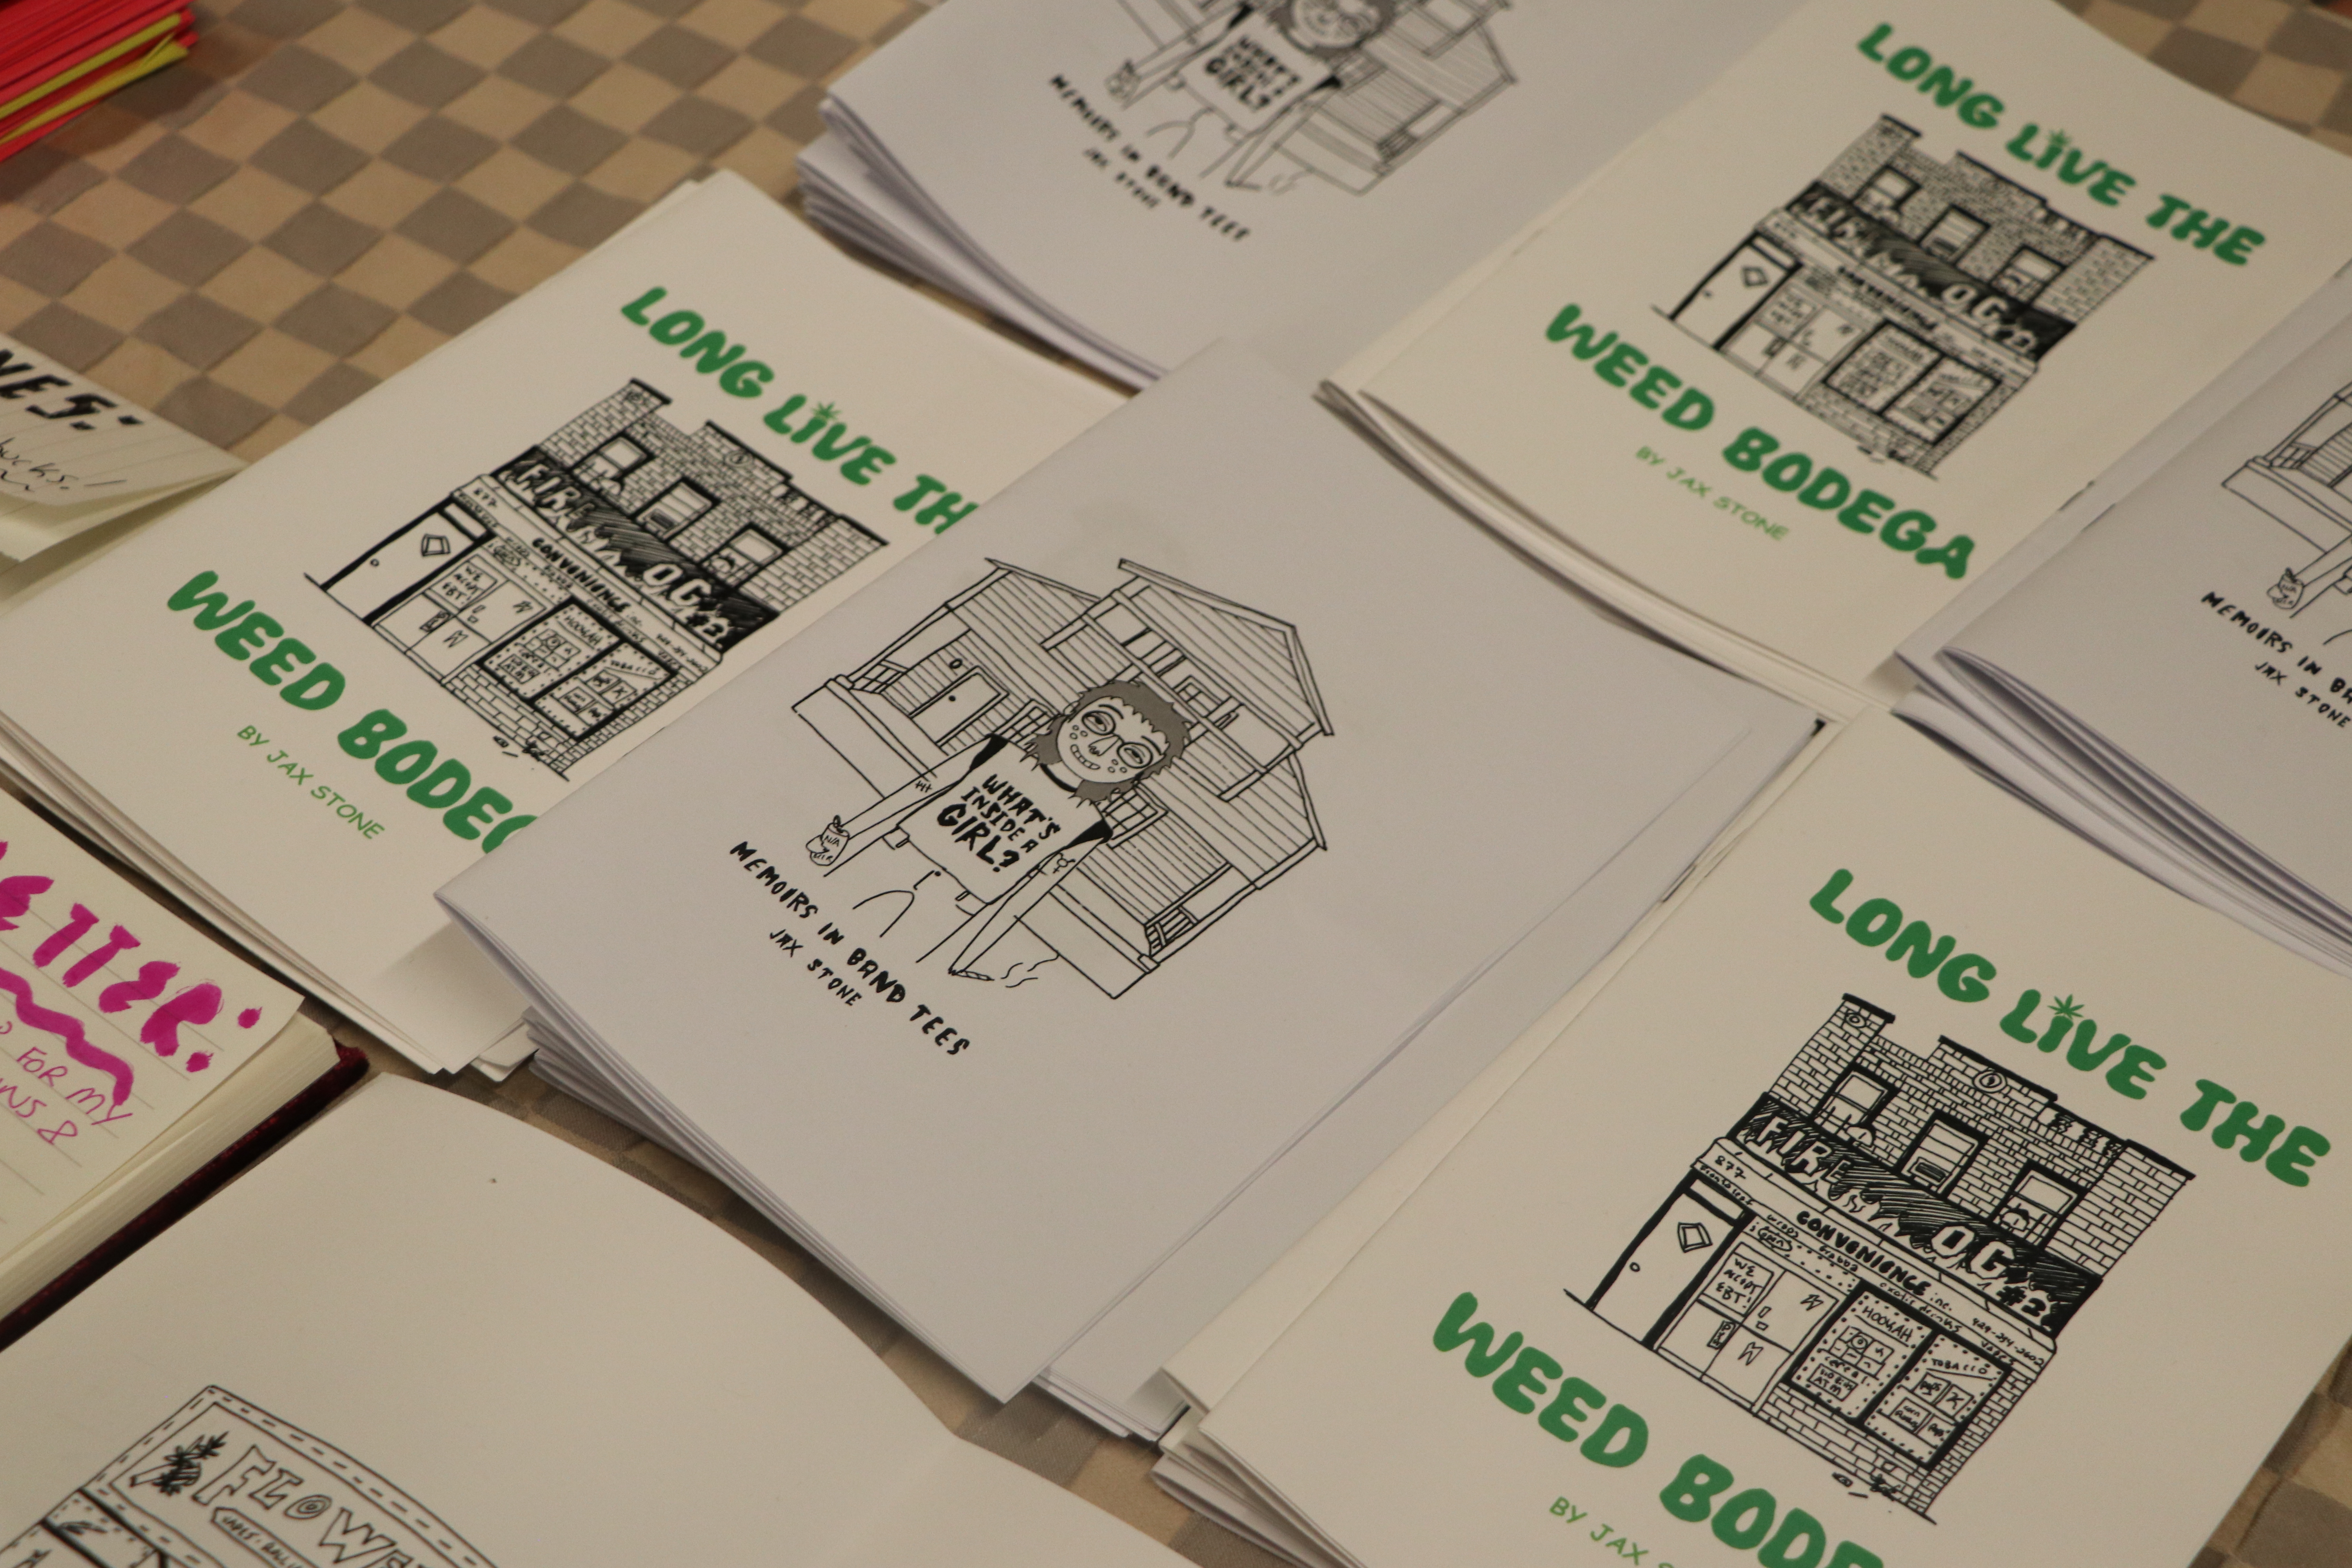 Zines titled "Long Live the Weed Bodega" lay out on a table. 